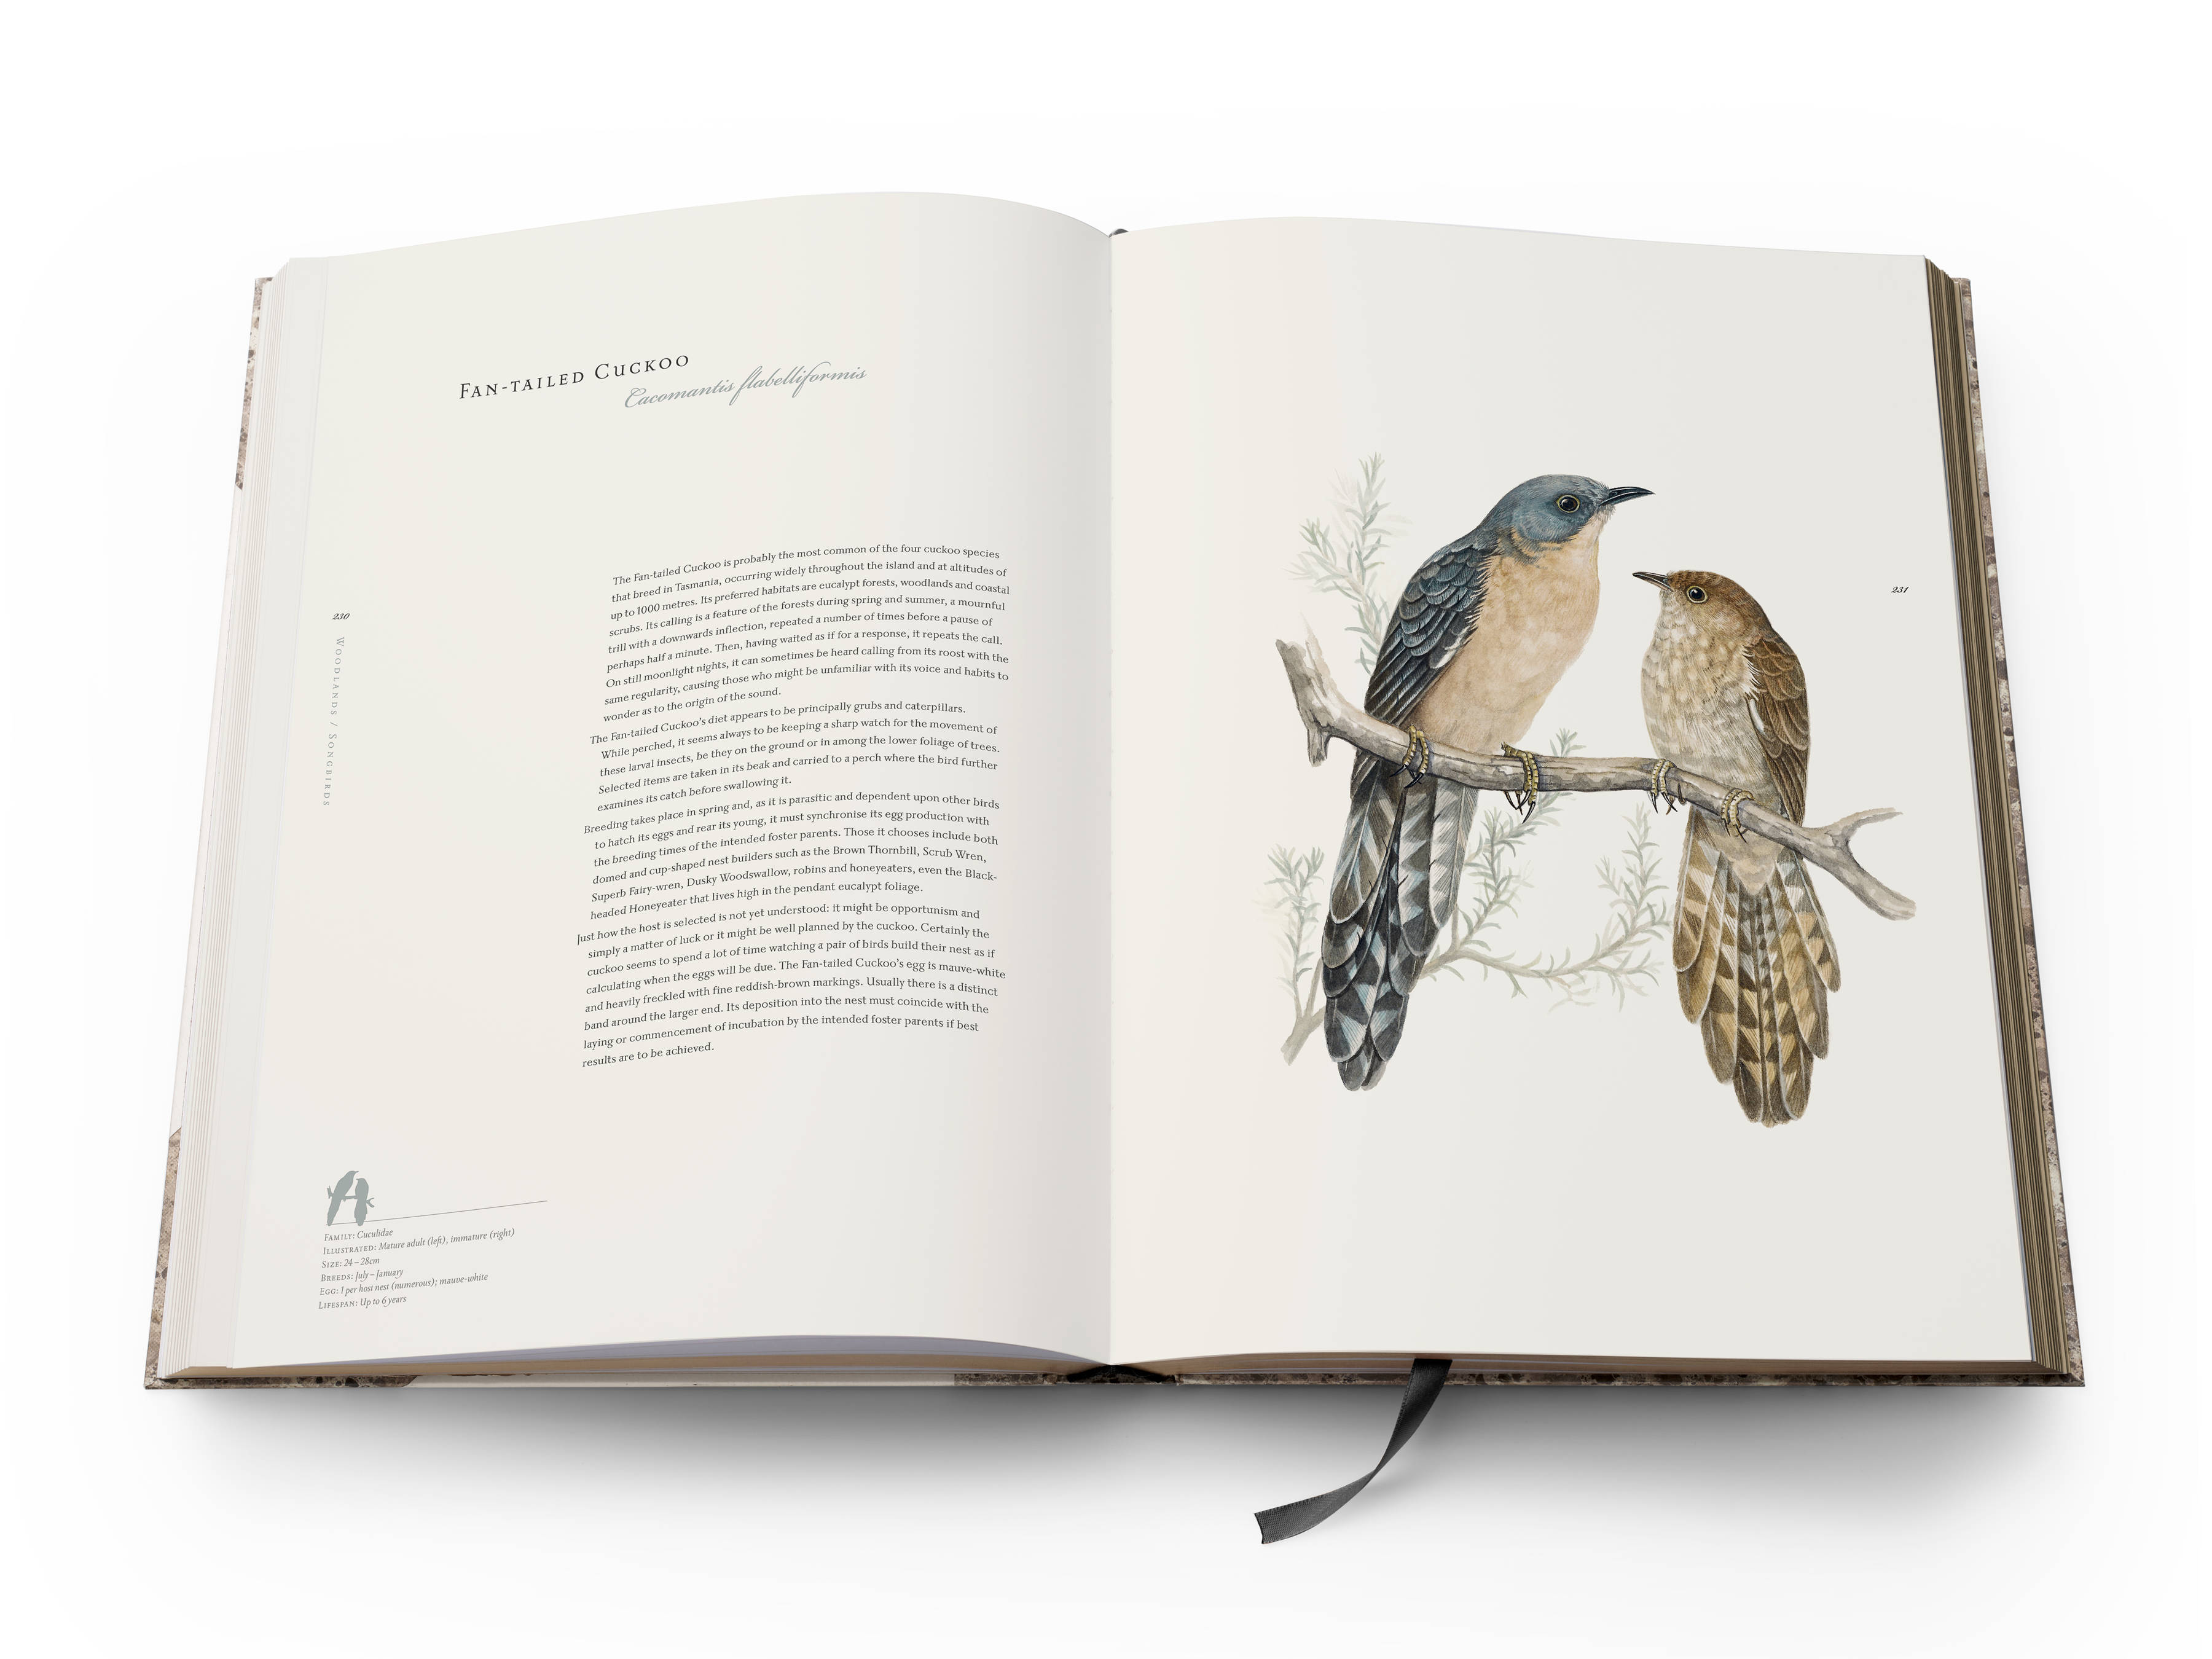 A double page spread from the book with text on the left and a full-page colour plate of a Fan-tailed Cuckoo ‘Cacomantis flabelliformis’ on the right.